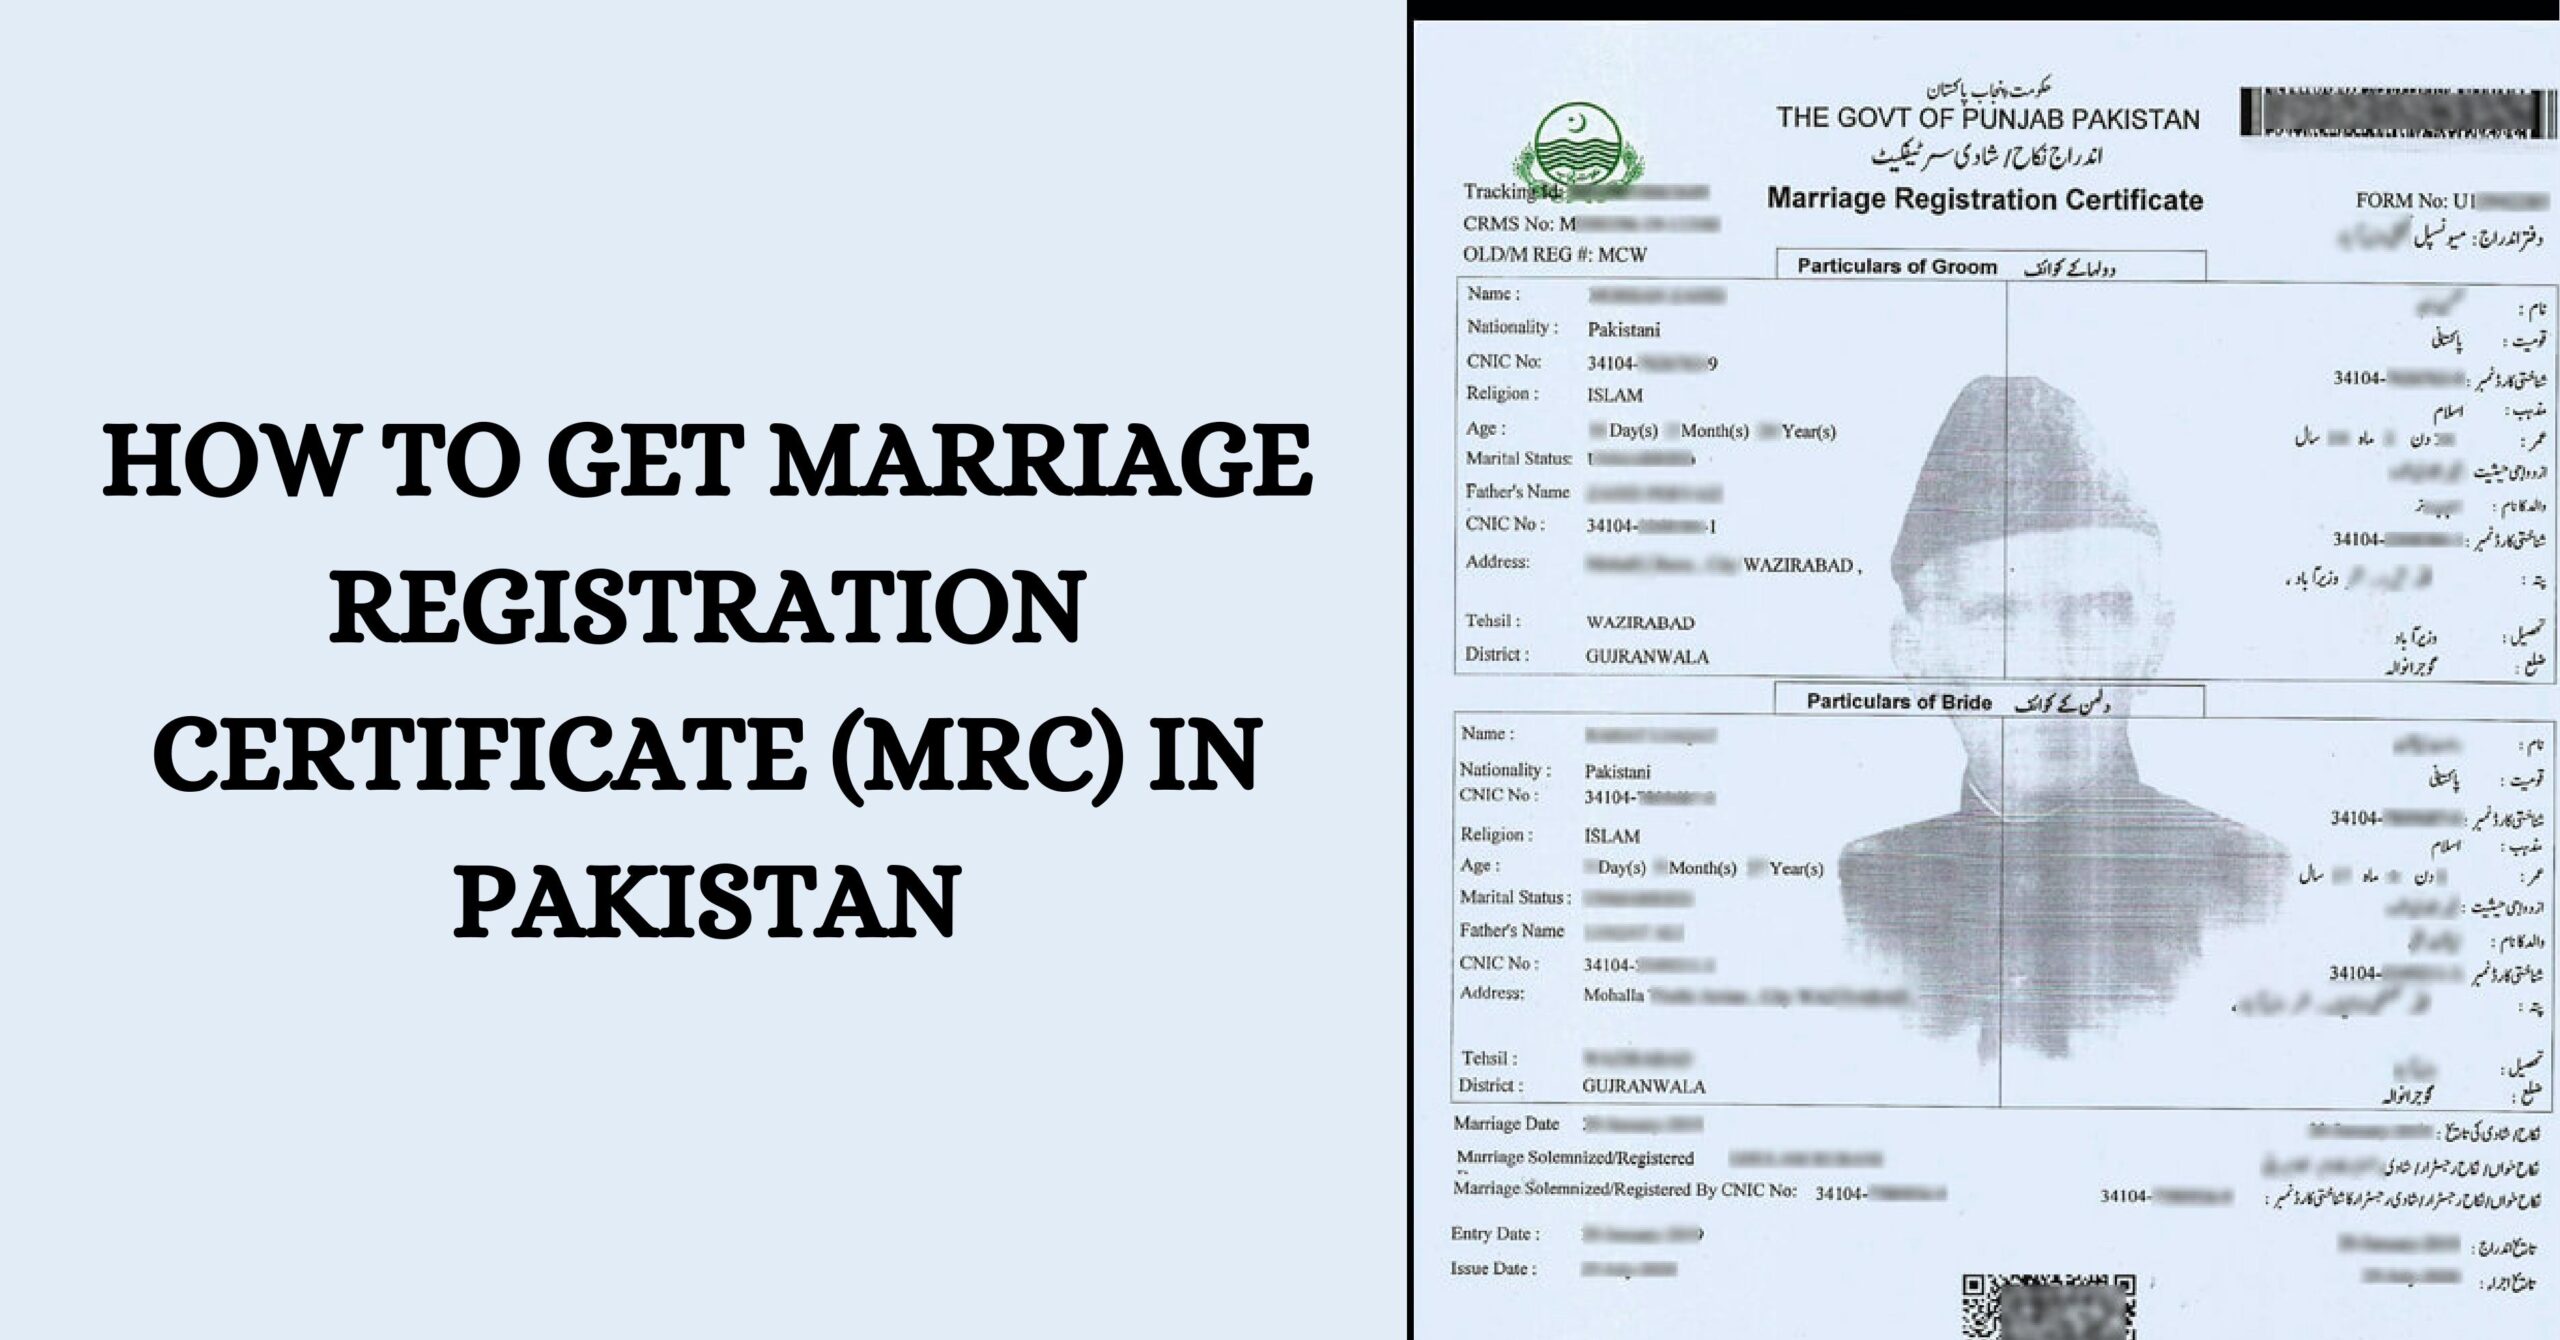 How To Get A Marriage Registration Certificate (MRC) in Pakistan